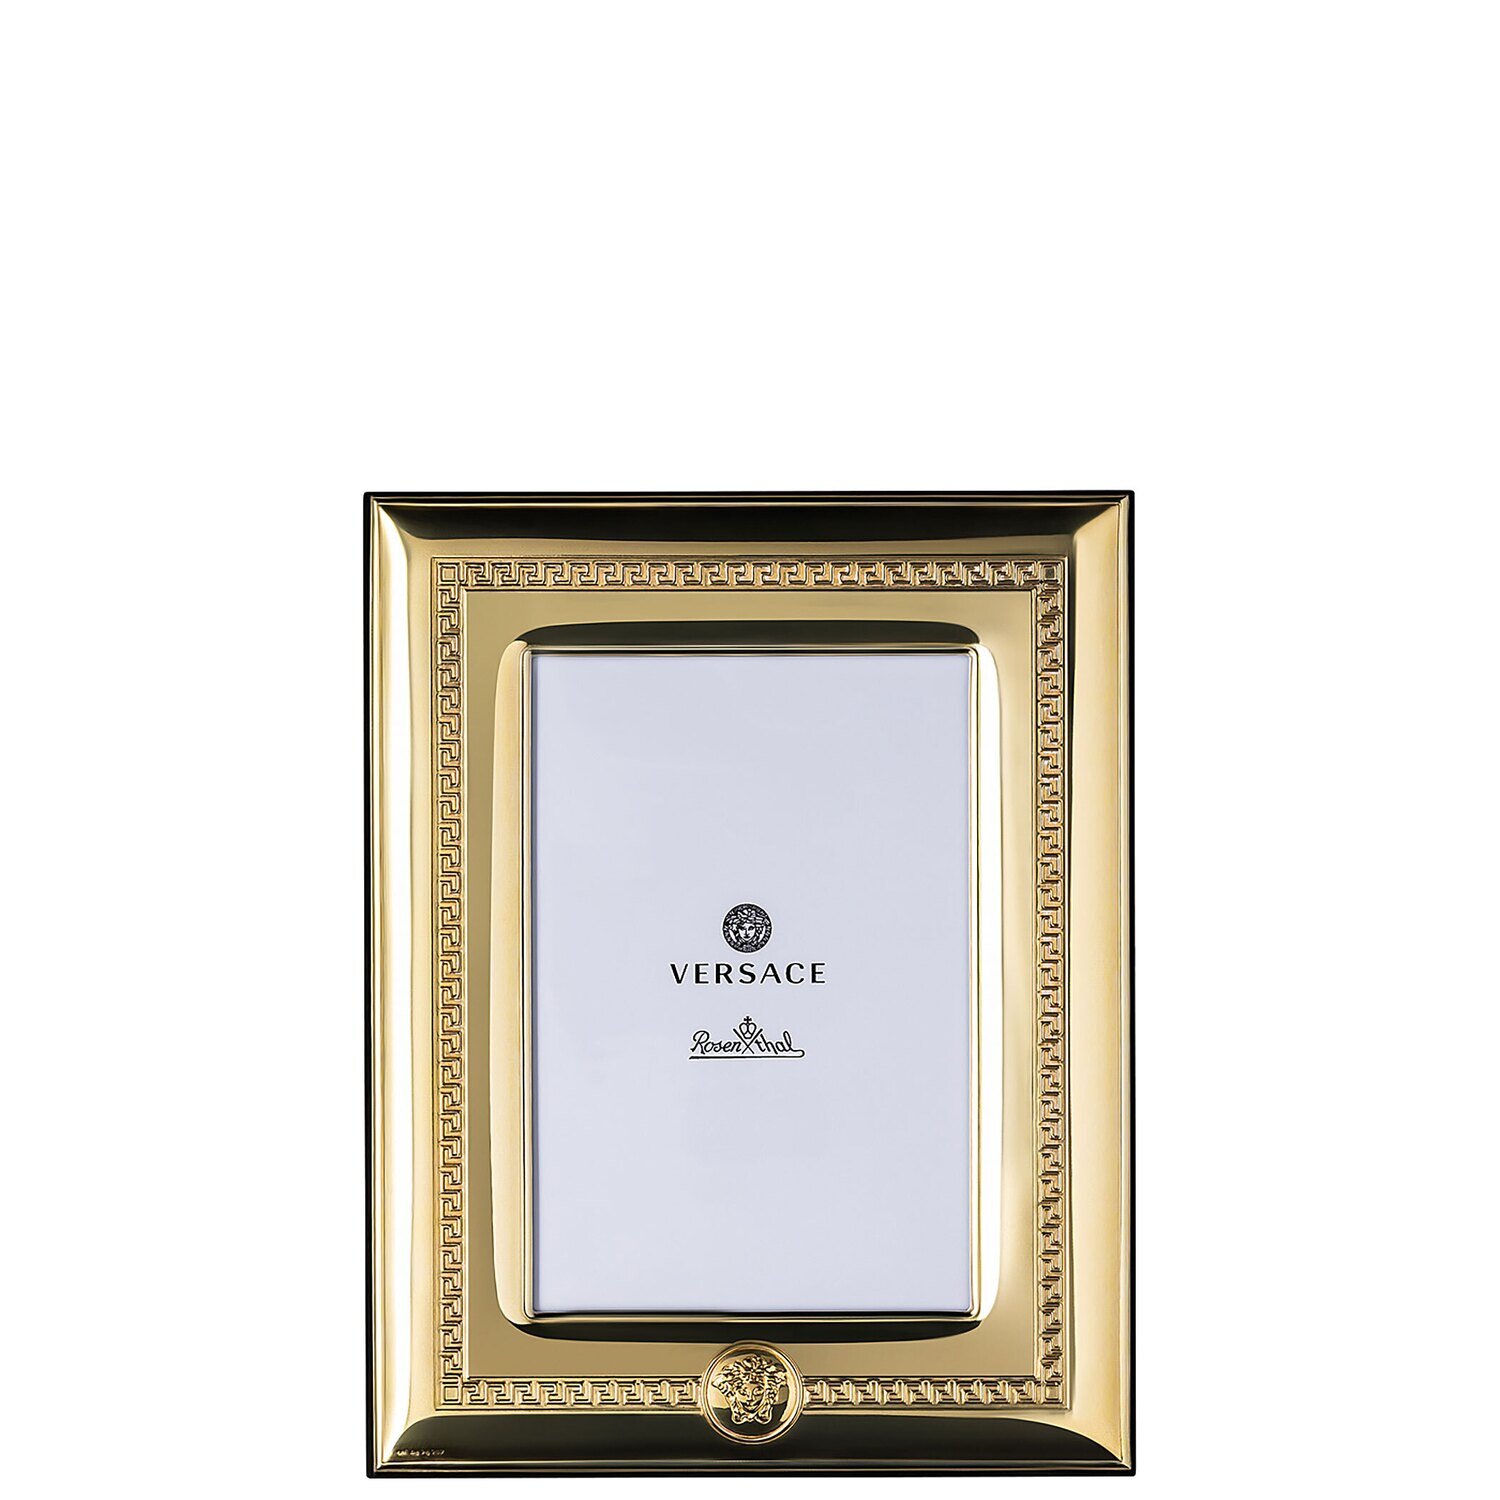 Versace VHF6 Gold Picture Frame 4 x 6 Inch